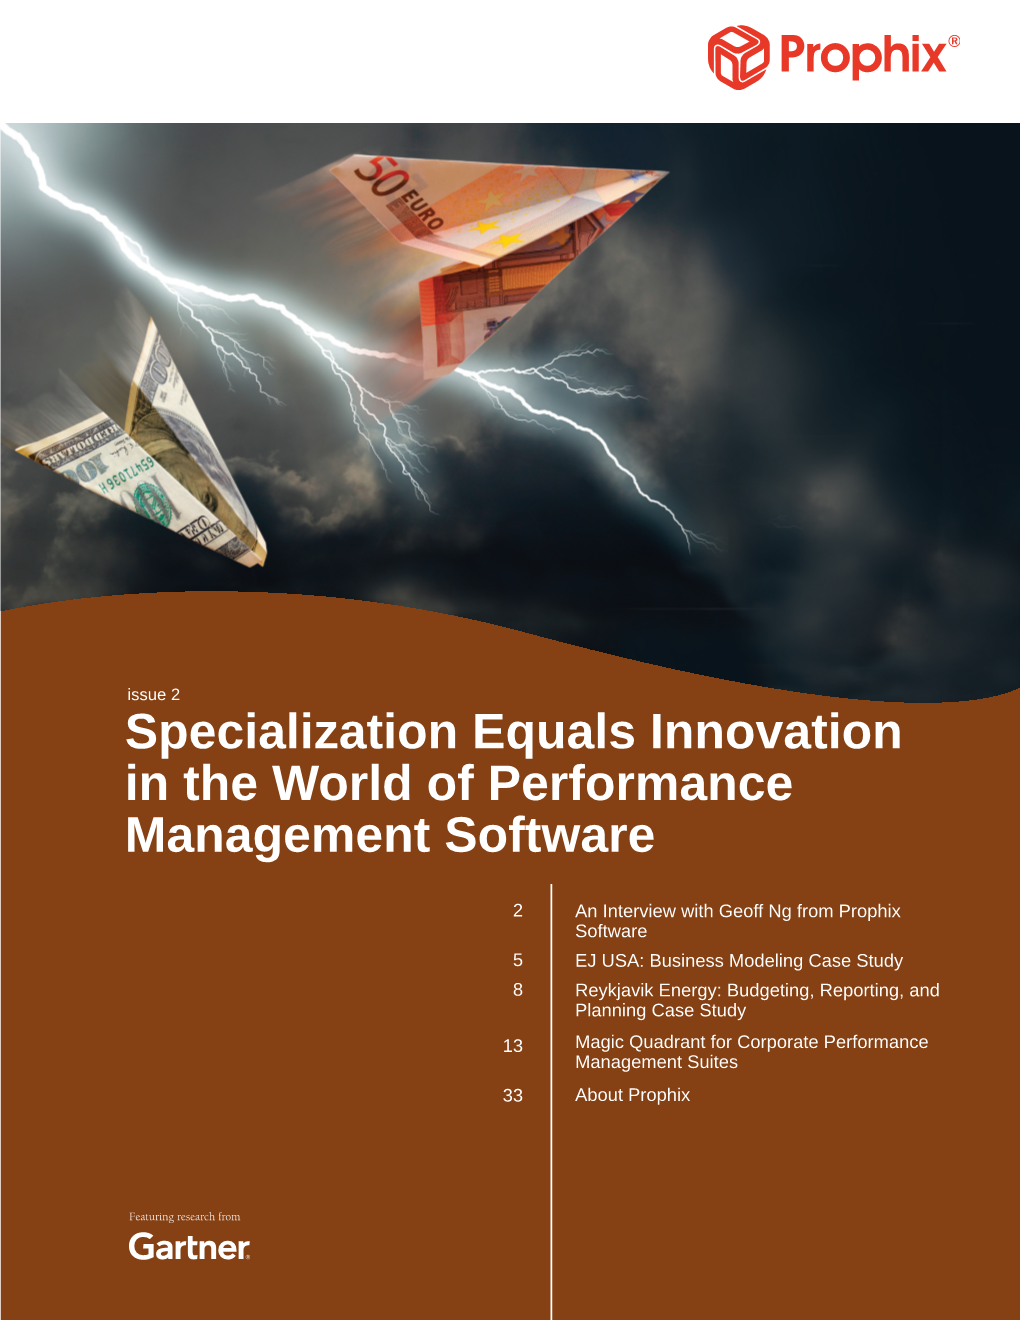 Specialization Equals Innovation in the World of Performance Management Software